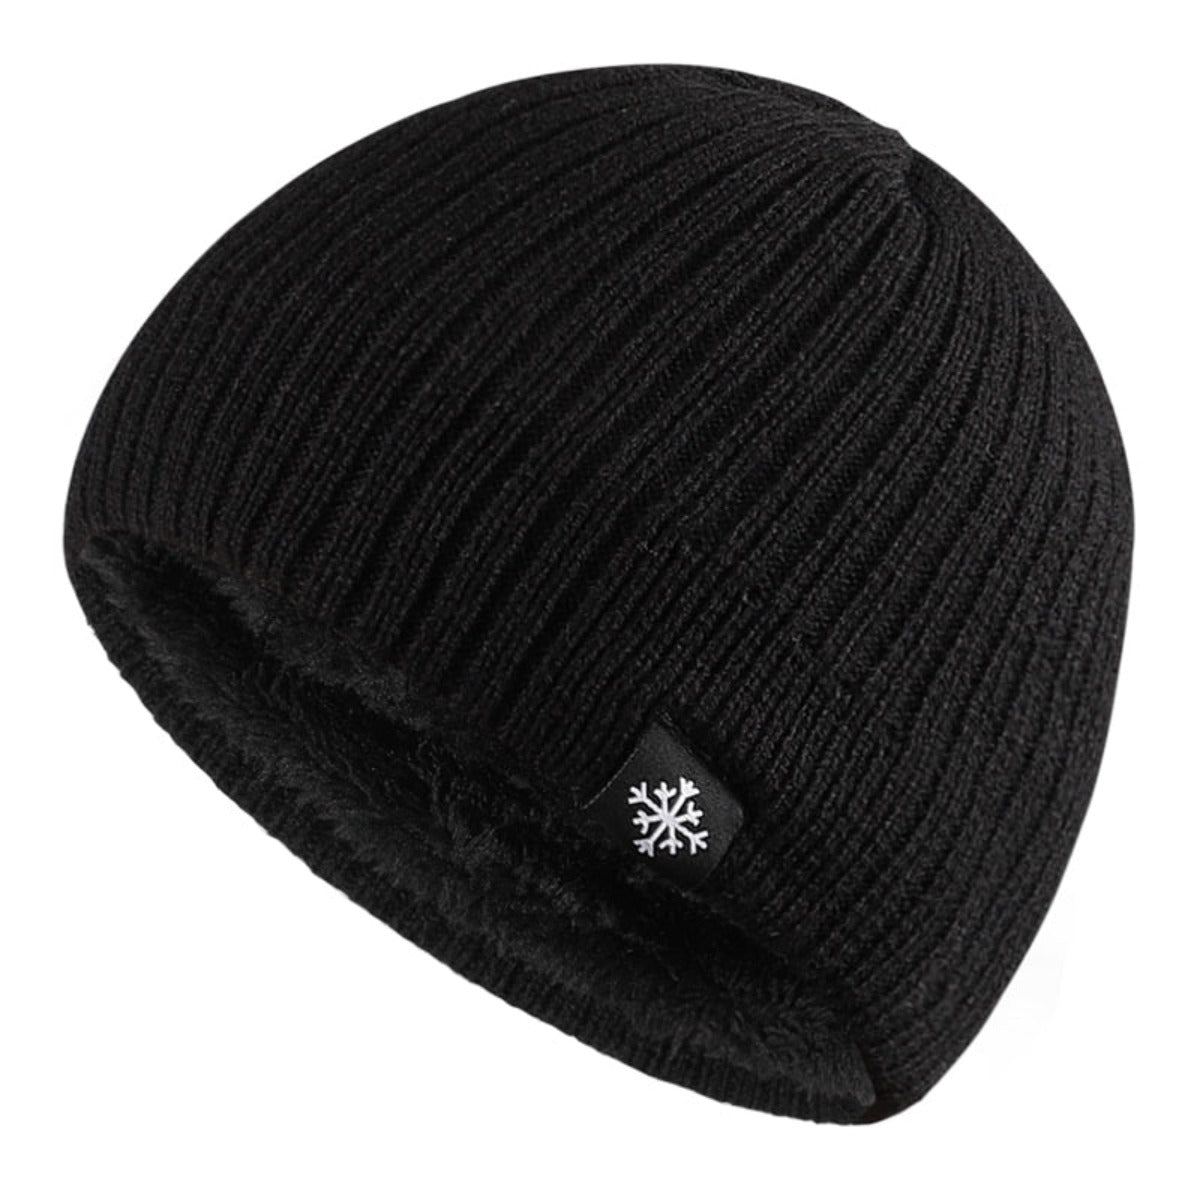 A soft and warm [Knitted Winter Beanie Hat] with a snowflake on it.